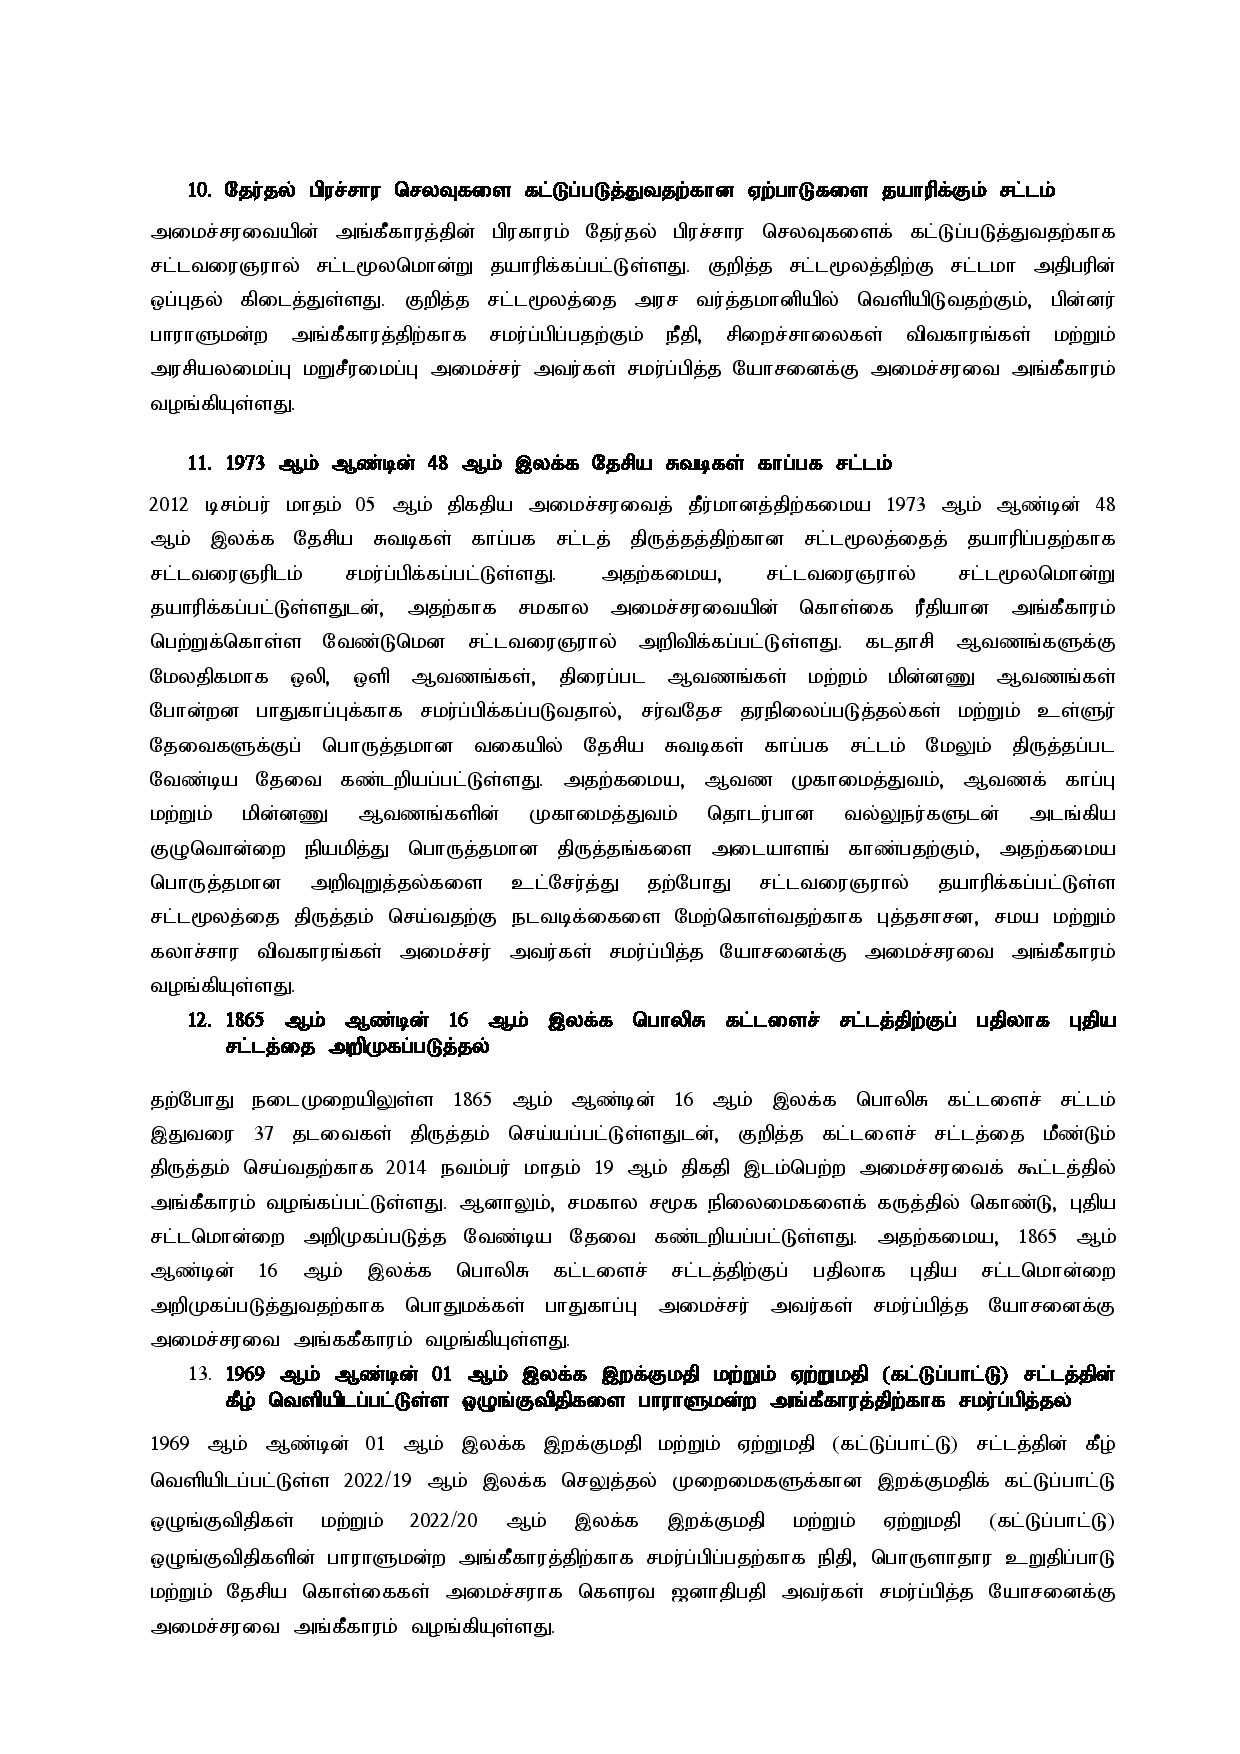 Cabinet Decisions on 21.11.2022 Tamil page 004